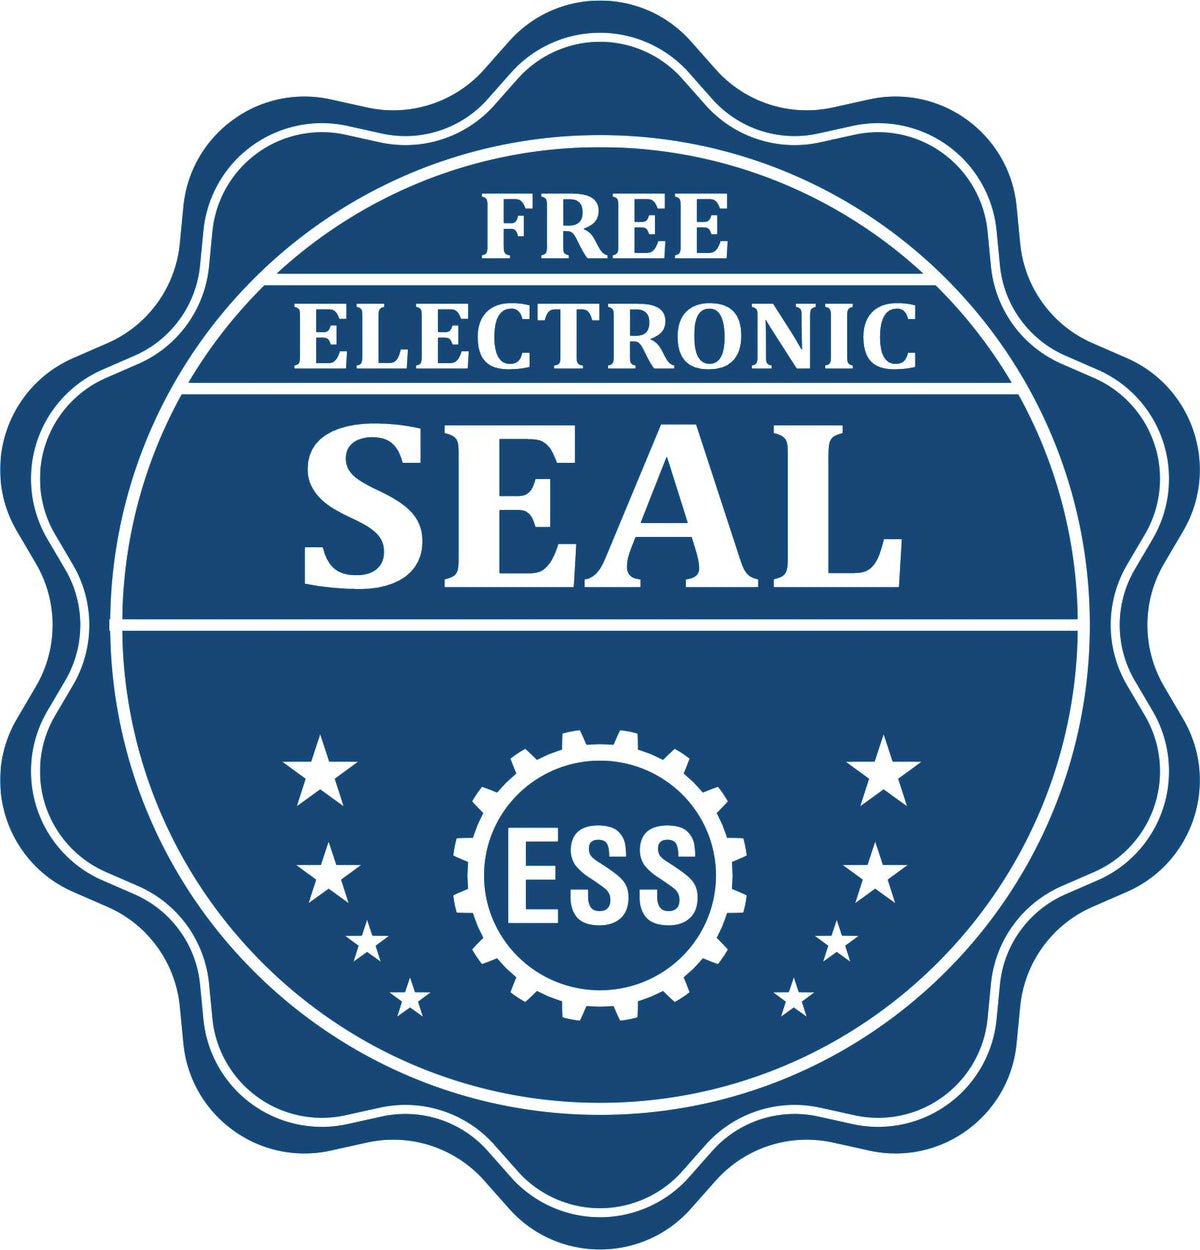 A badge showing a free electronic seal for the Super Slim Vermont Notary Public Stamp with stars and the ESS gear on the emblem.